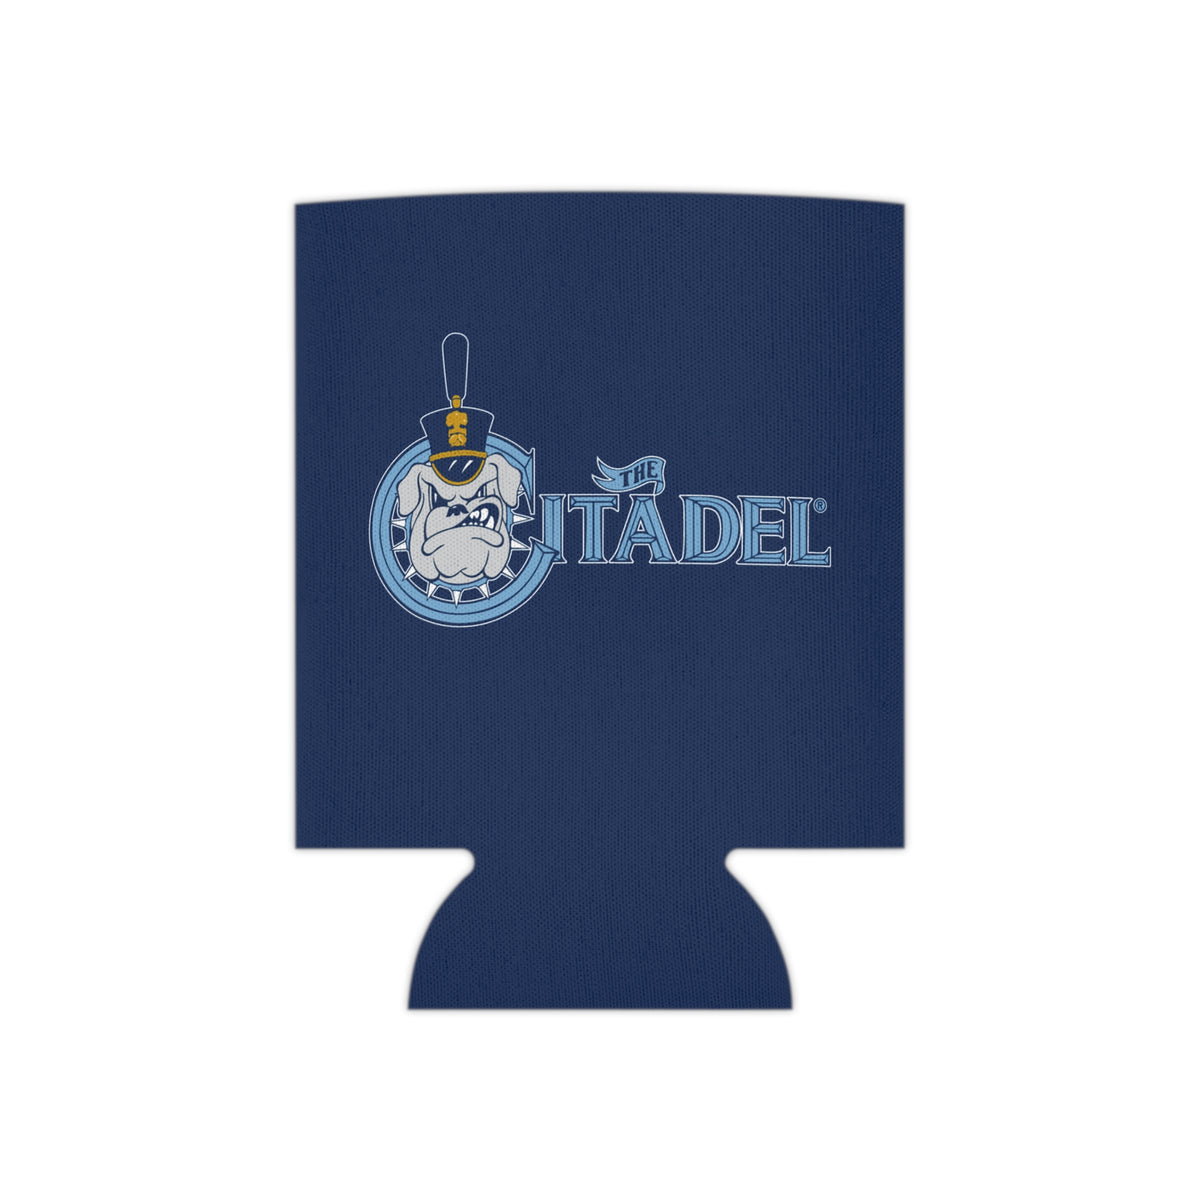 The Citadel Spike Can Cooler